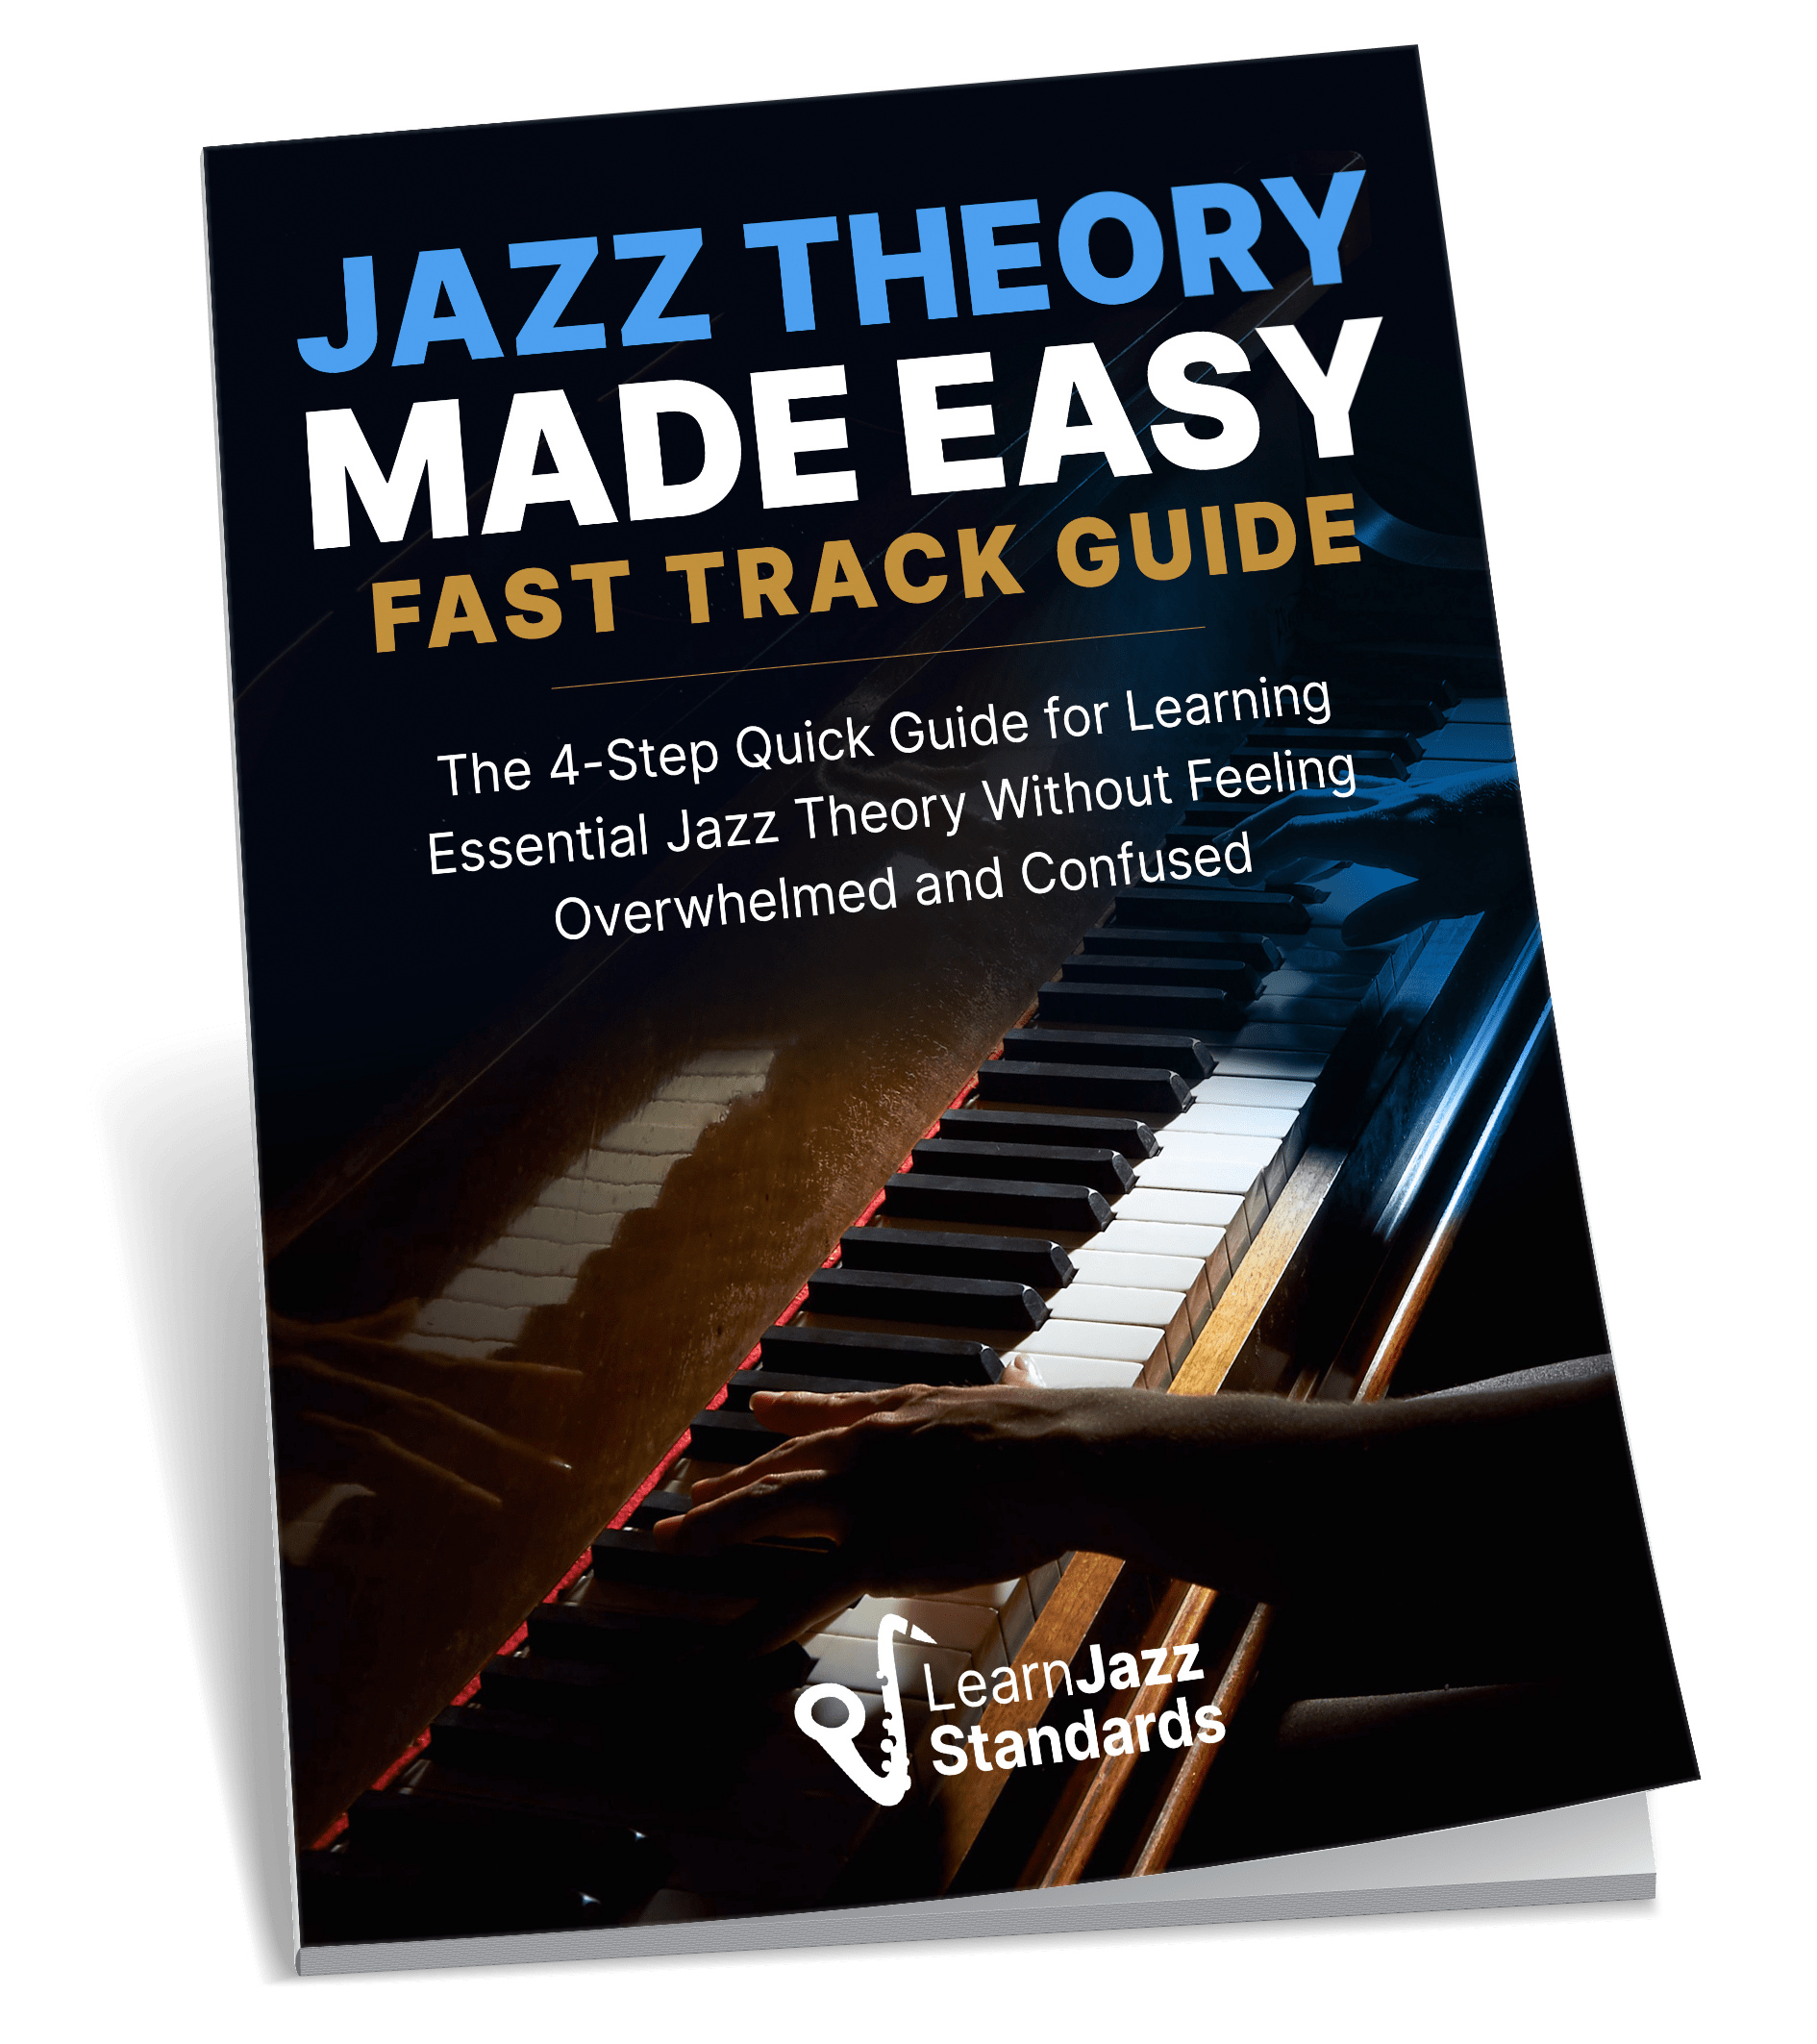 Jazz Theory Made Easy Fast Track Guide Ebook Cover